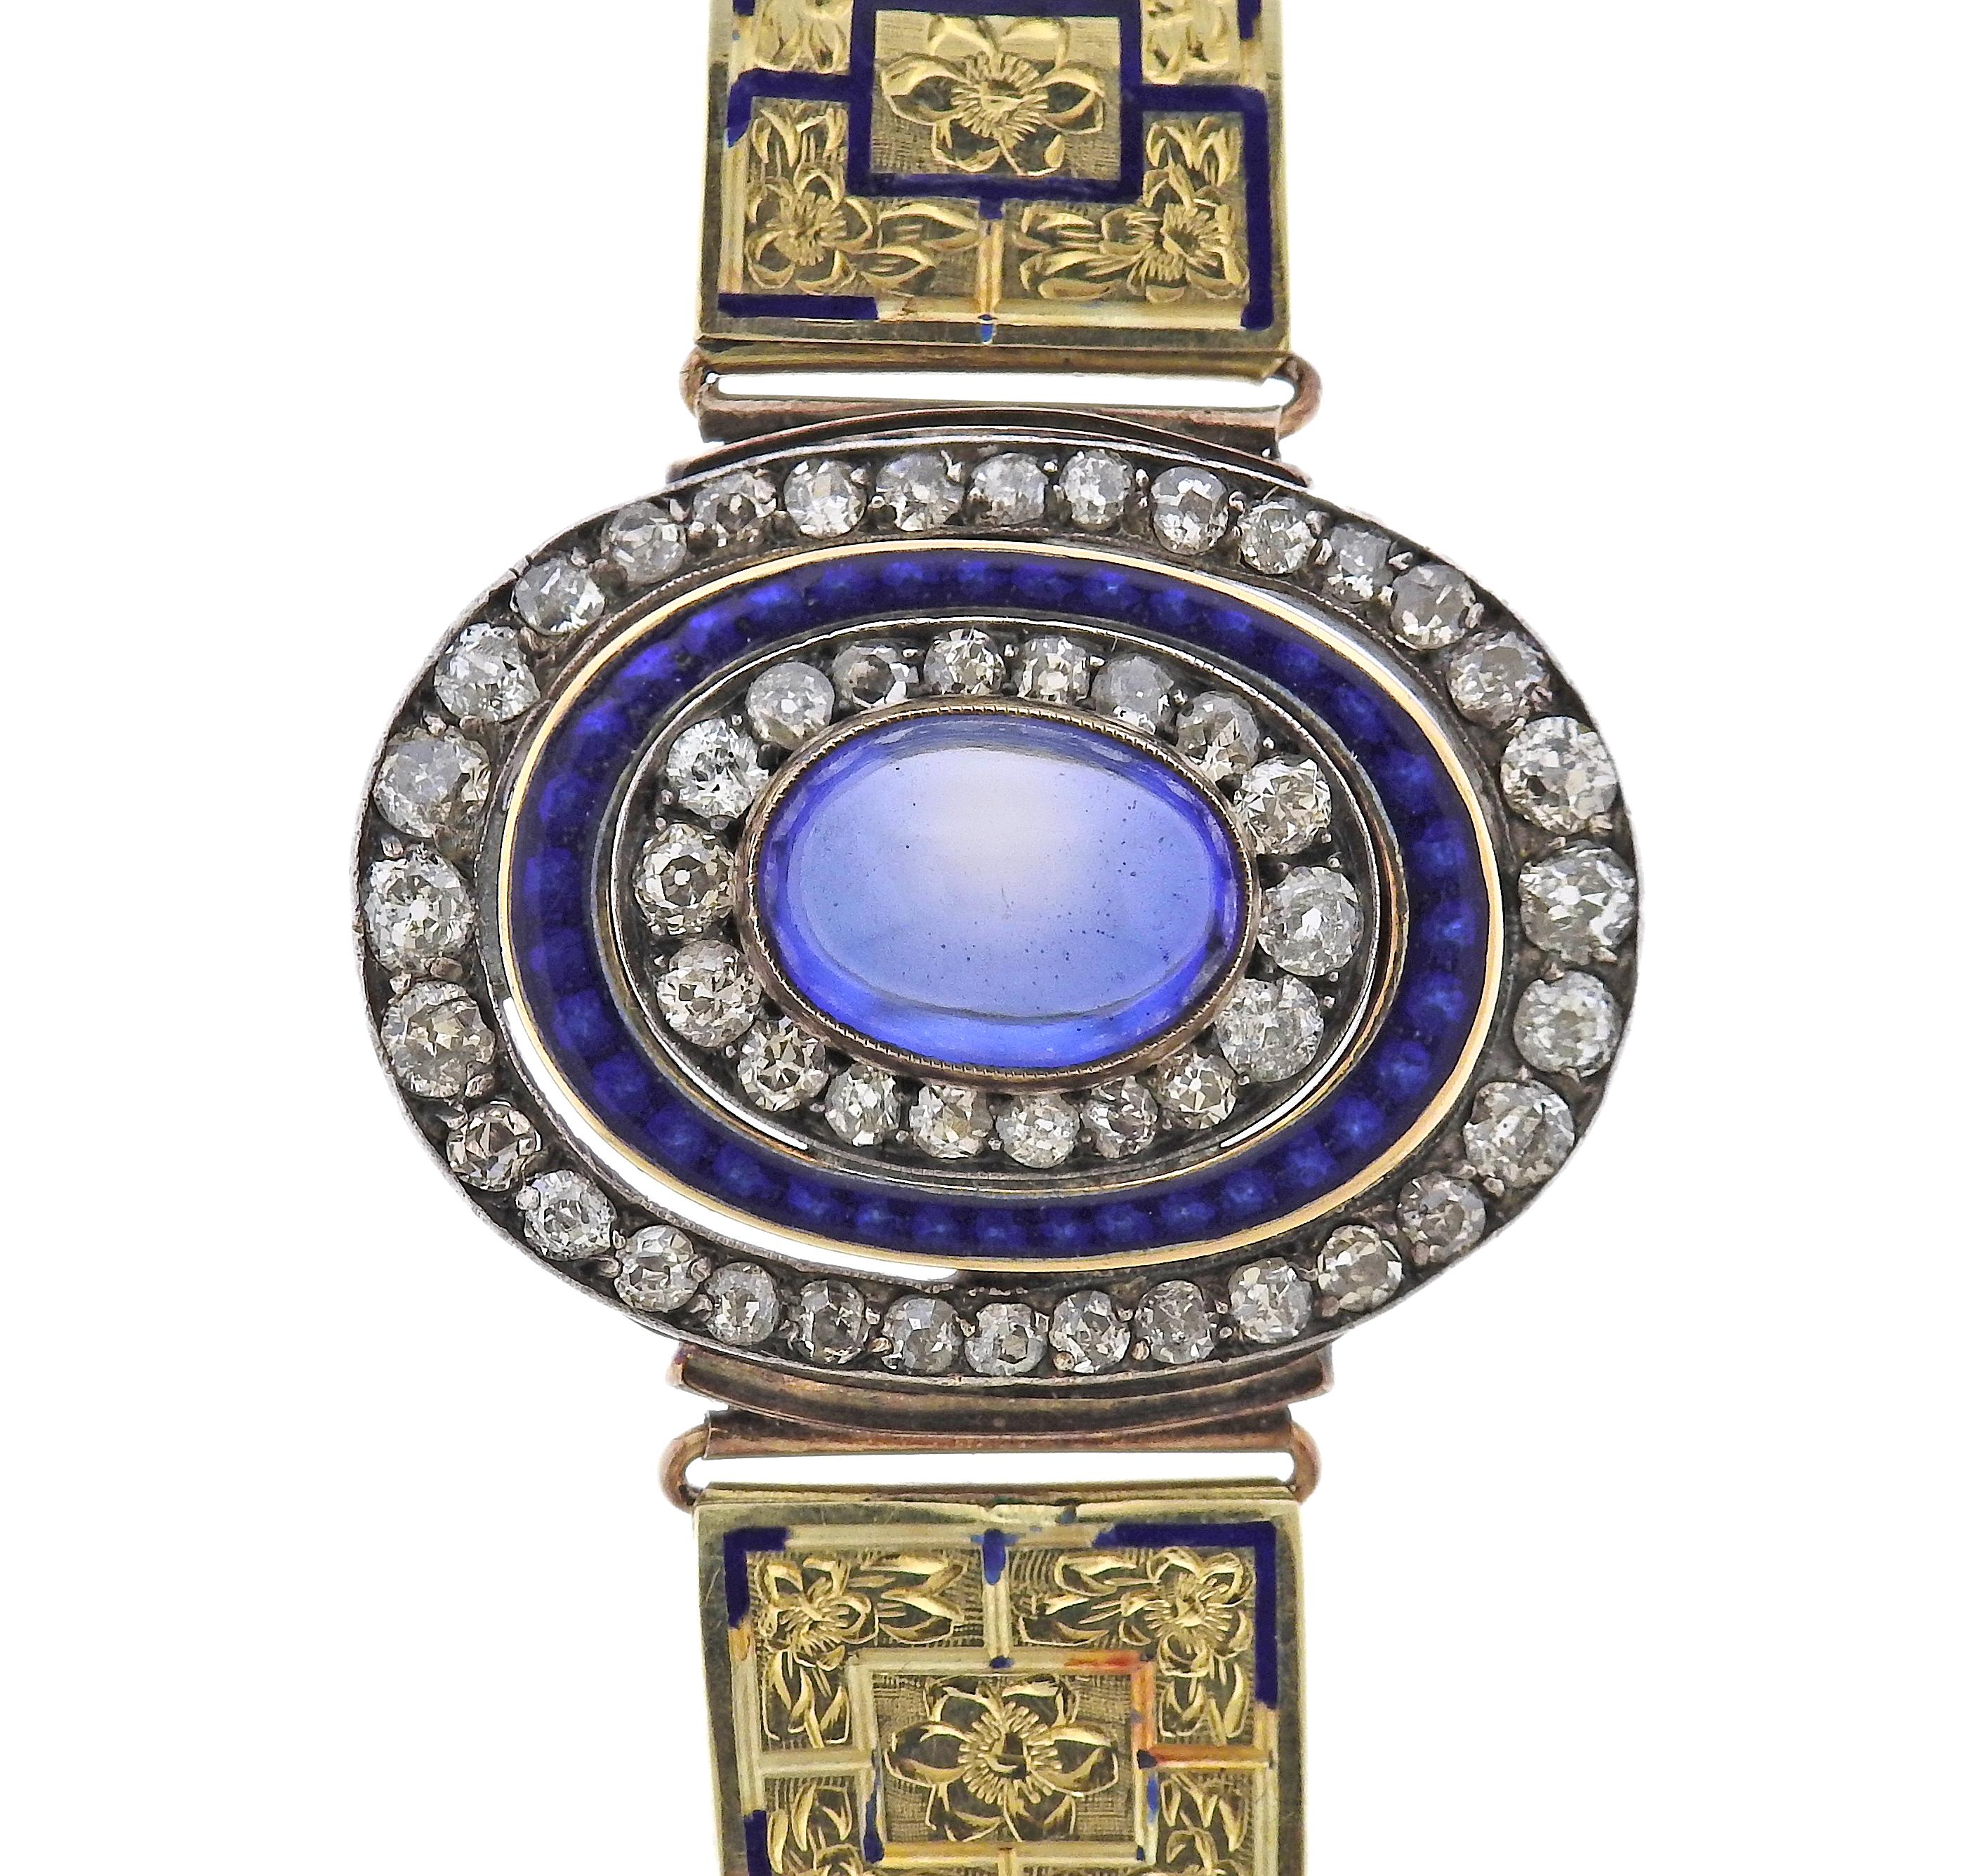 Continental 14k gold bracelet, with center blue stone cabochon, blue enamel (some loss of enamel is present on the bracelet), and approx. 2.40ctw in diamonds. Bracelet is 6 1/8